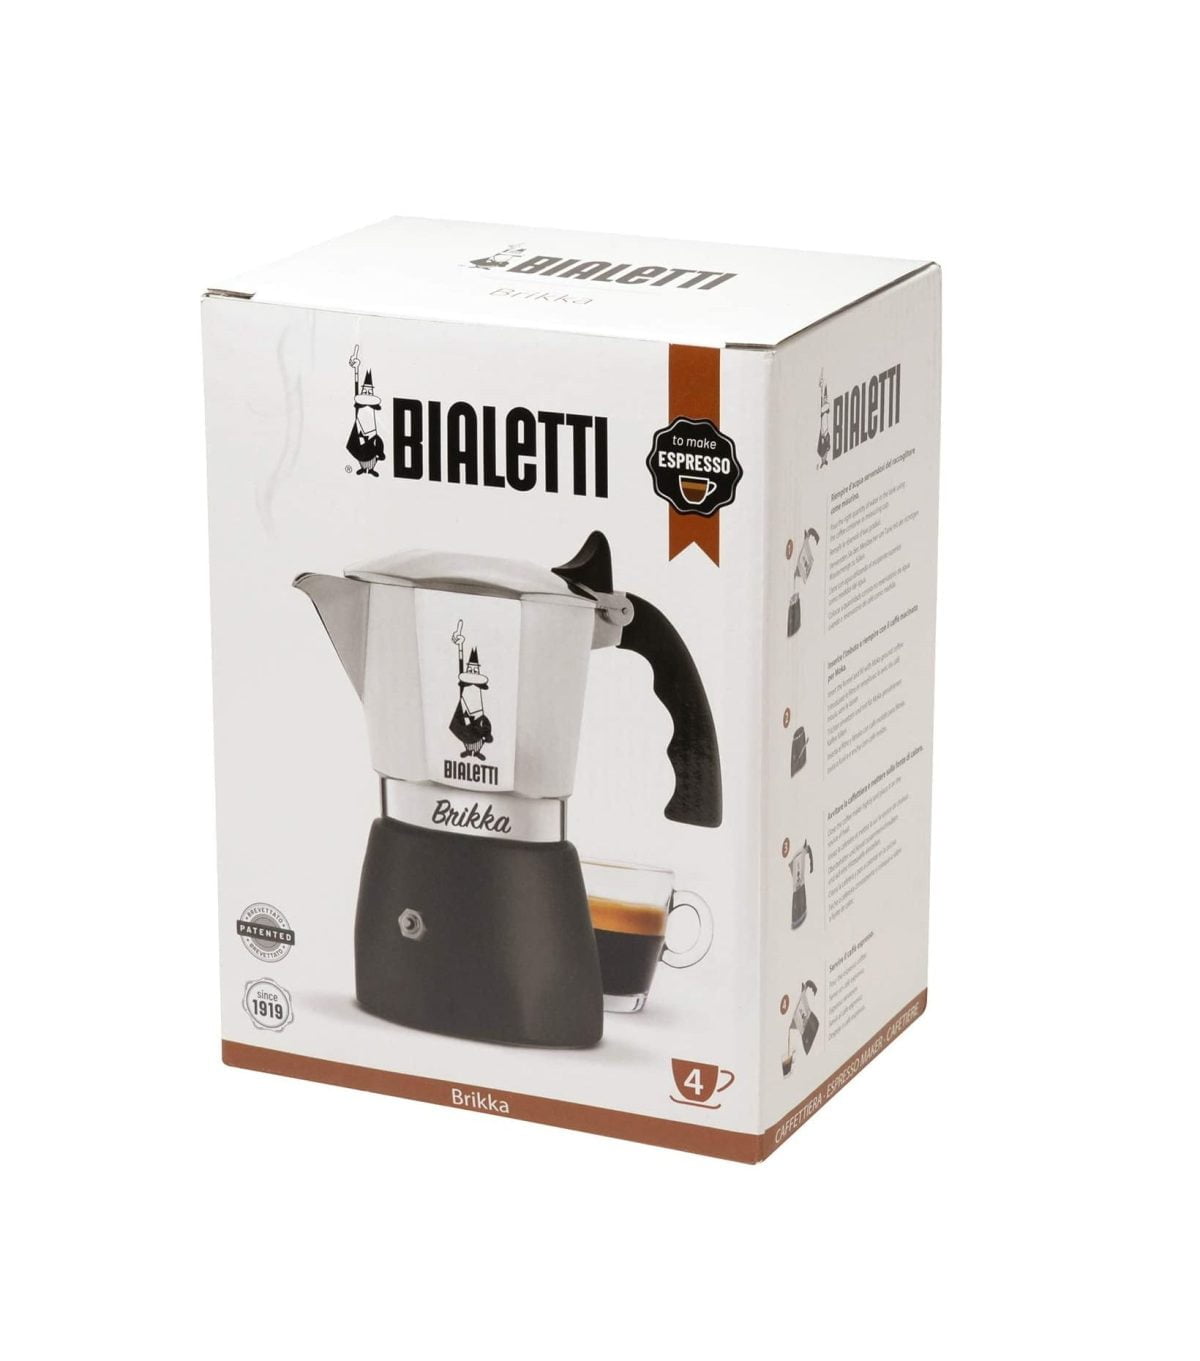 614Mzwnlpll. Ac Sl1500 Bialetti &Lt;H1&Gt;Bialetti Moka Pot Brikka 4 Cups&Lt;/H1&Gt; The Brikka Model, Which Has The Most Special Place Among The Bialetti Moka Pots, Works At Higher Pressure Thanks To Its Special Design, Thus Allowing You To Enjoy A Creamy, Foamy And Intense Coffee. &Lt;Strong&Gt;It Consists Of Three Parts:&Lt;/Strong&Gt; The Bottom-Up Water Reservoir, The Filter Where You Will Put The Ground Coffee And The Reservoir Where The Espresso Will Be Filled. &Lt;Ul&Gt; &Lt;Li&Gt;Made Of Aluminium Casting Material.&Lt;/Li&Gt; &Lt;Li&Gt;You Can Prepare 4 Shots Of Espresso (Approximately 240 Ml).&Lt;/Li&Gt; &Lt;Li&Gt;Not To Be Washed In The Dishwasher, Can Only Be Cleaned With Water.&Lt;/Li&Gt; &Lt;/Ul&Gt; Https://Youtu.be/O2Xi-1Ae2Rg Bialetti Moka Pot Brikka 4 Cup - Espresso Coffee